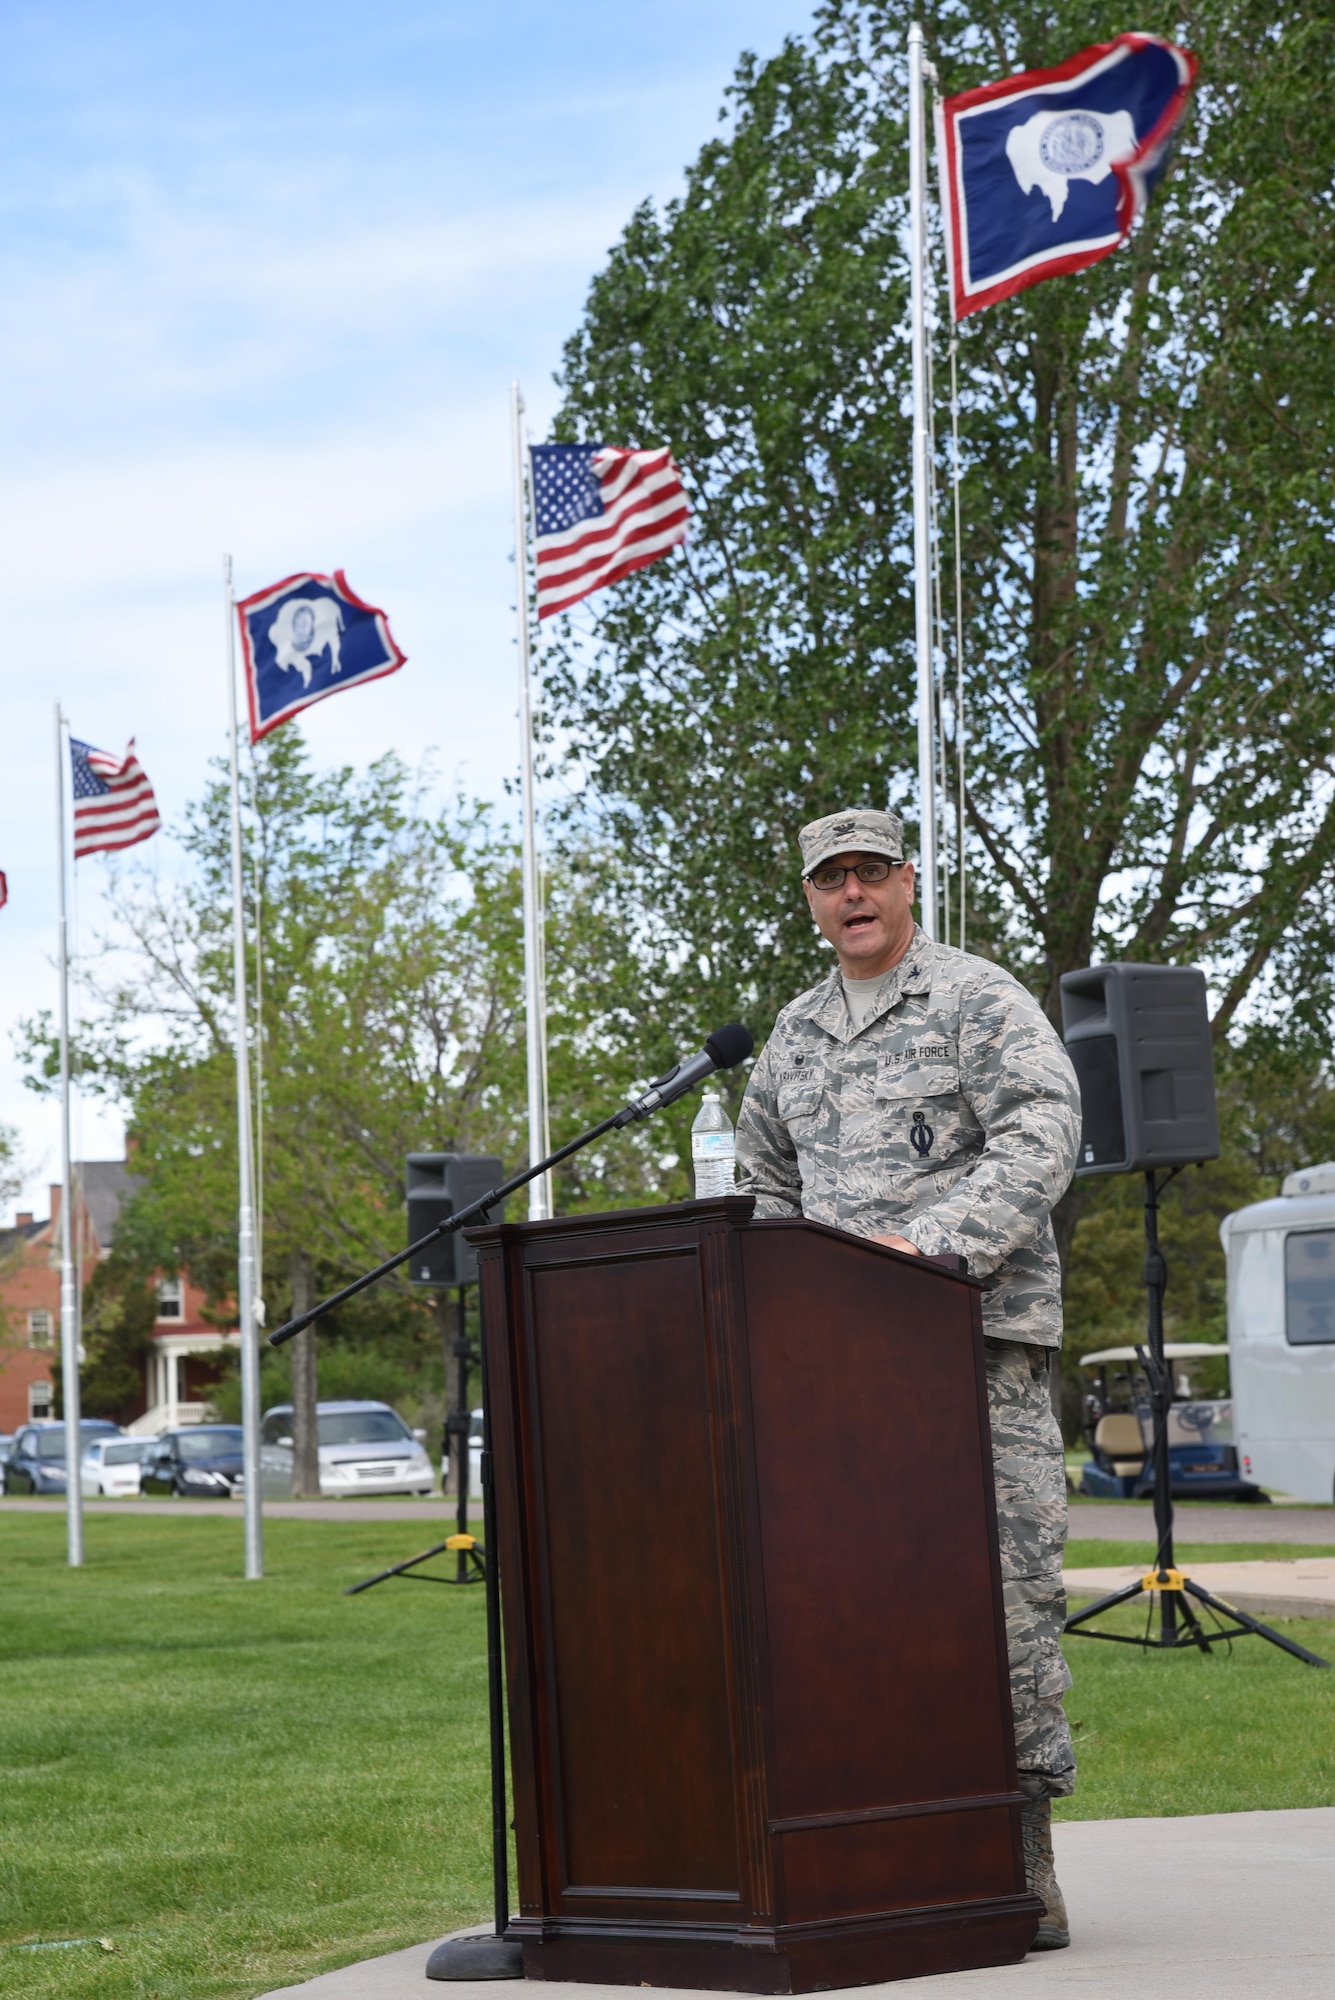 Colonel Stephen Kravitsky, 90th Missile Wing commander, speaks at the 90th Mission Support Group Change of Command on the Argonne Parade Field at F.E. Warren Air Force Base, Wyo., June 16, 2017. Kravitsky spoke about Col. Frank Verdugo's achievements in his tenure at the 90th MSG, as well as why Col. Tricia Van Den Top is the right fit to succeed Verdugo and assume command of the group. (U.S. Air Force photo by Glenn S. Robertson)